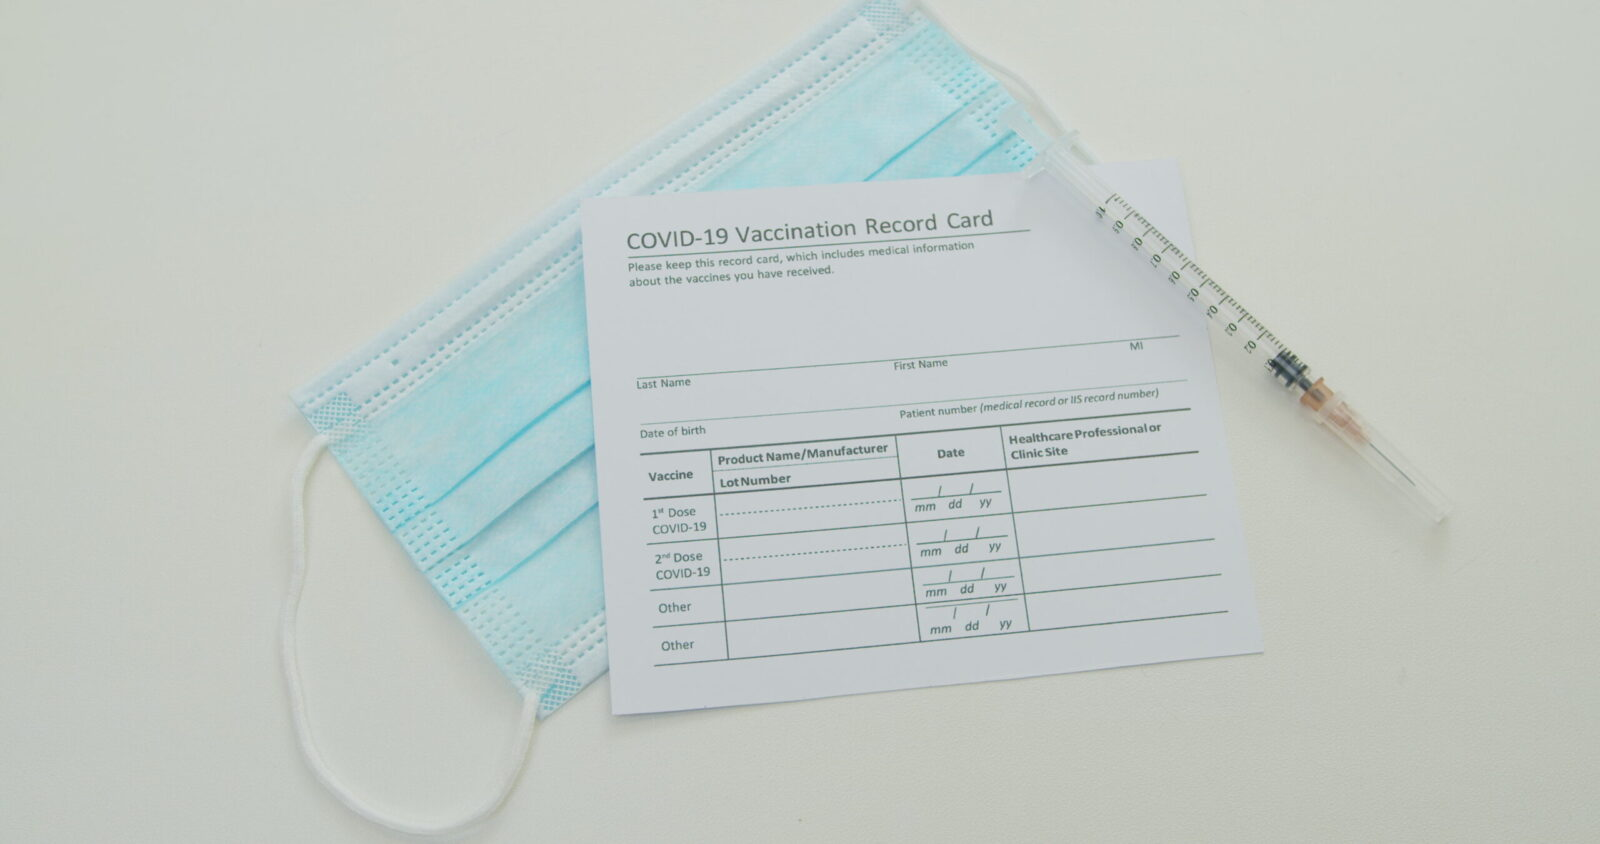 Medical mask and COVID-19 vaccine on vaccination record card approved by CDC with corona virus vaccine vials. White background.